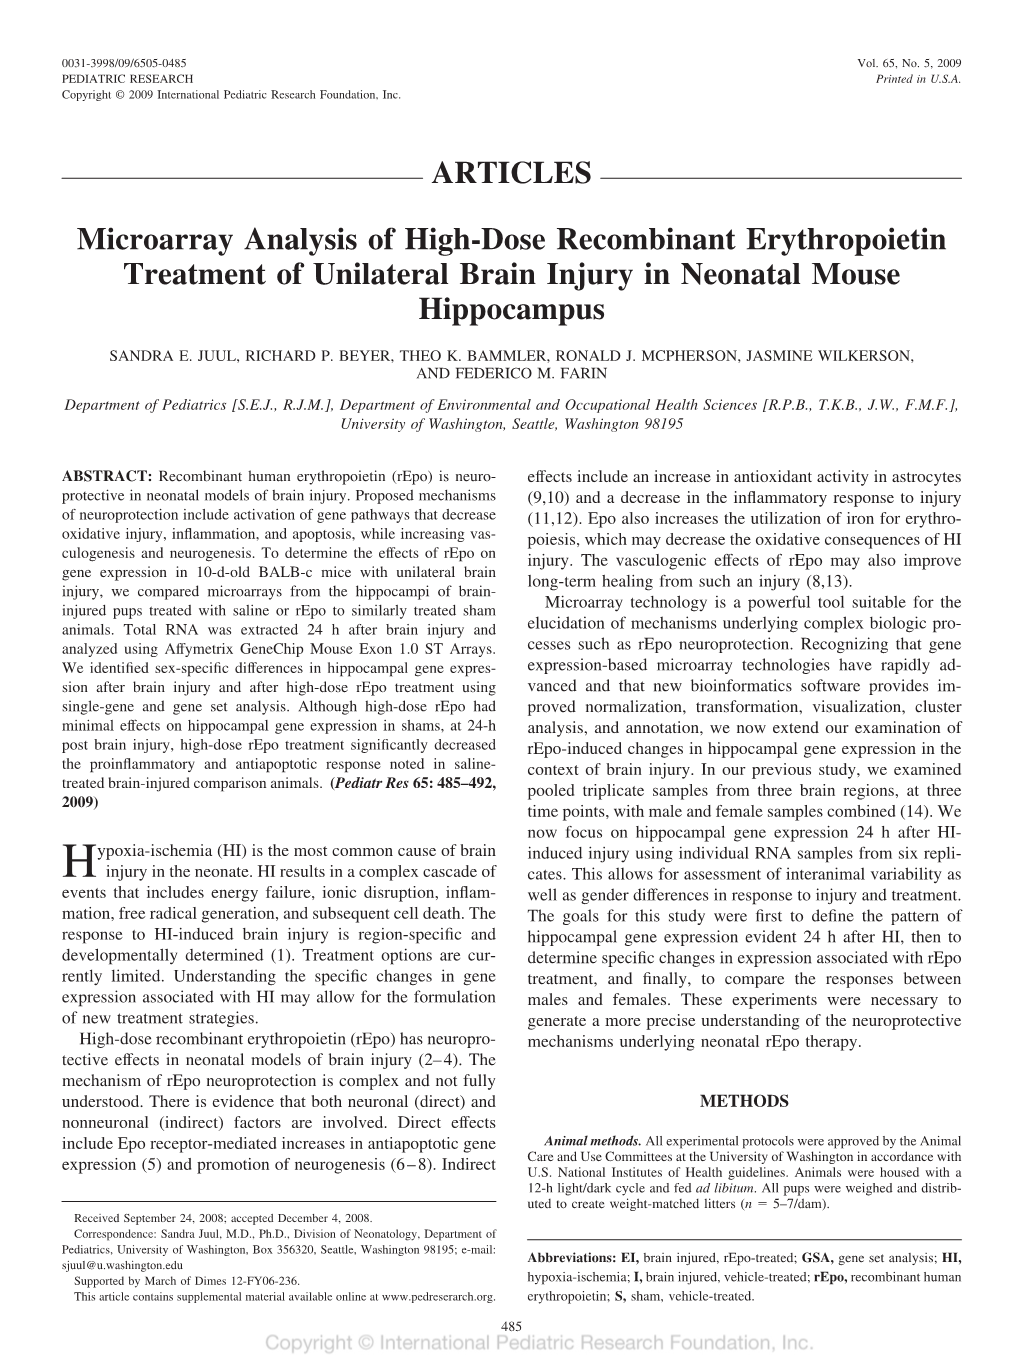 Microarray Analysis of High-Dose Recombinant Erythropoietin Treatment of Unilateral Brain Injury in Neonatal Mouse Hippocampus